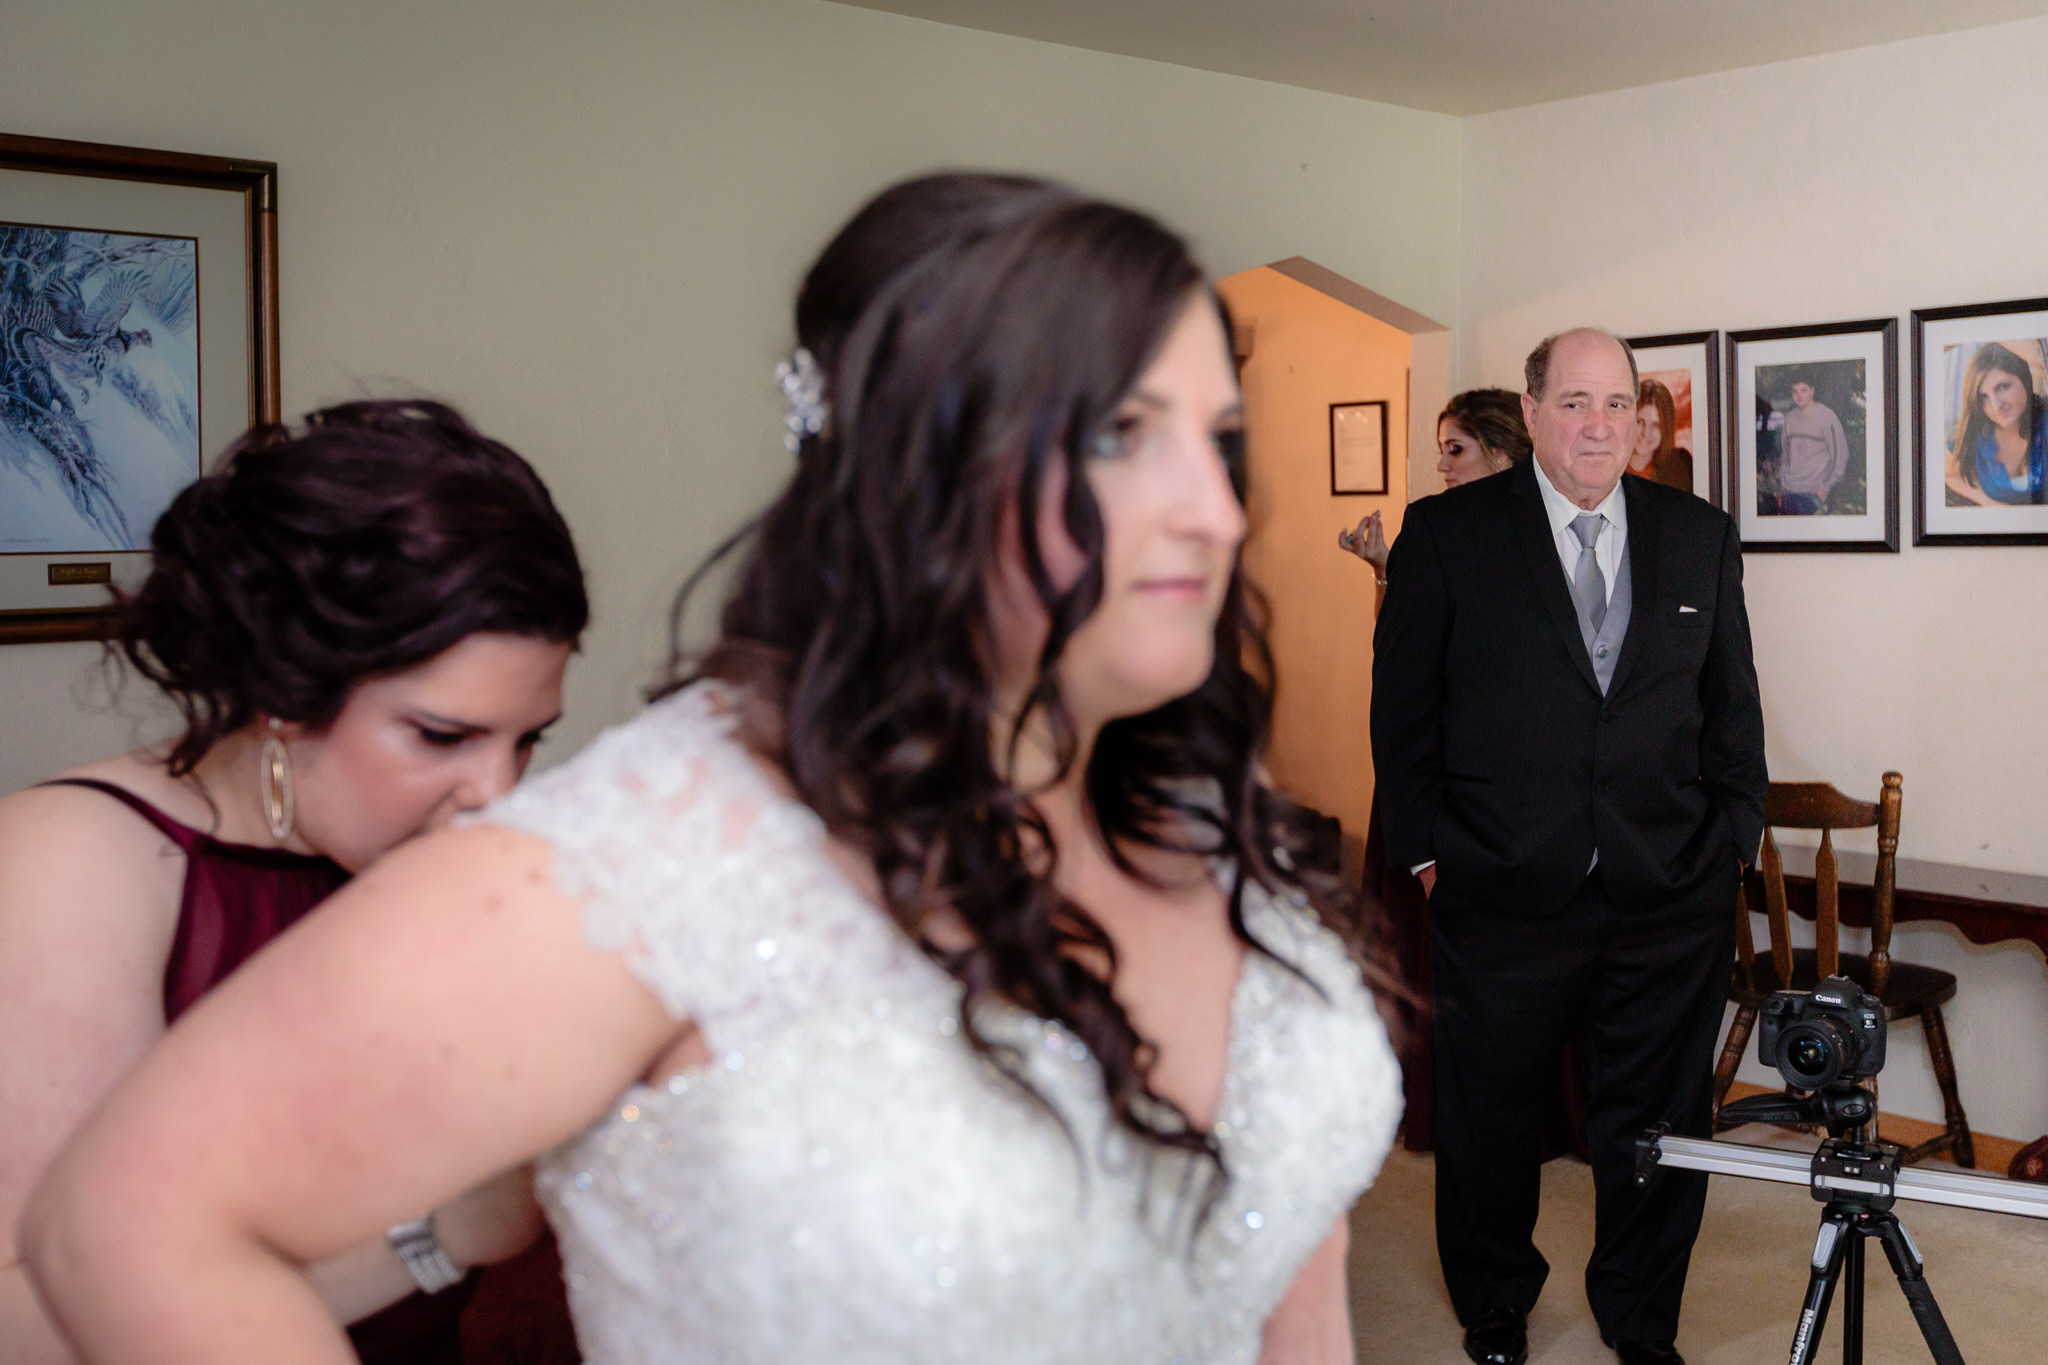 Father of the bride watches as her sister buttons the back of her Allure wedding dress